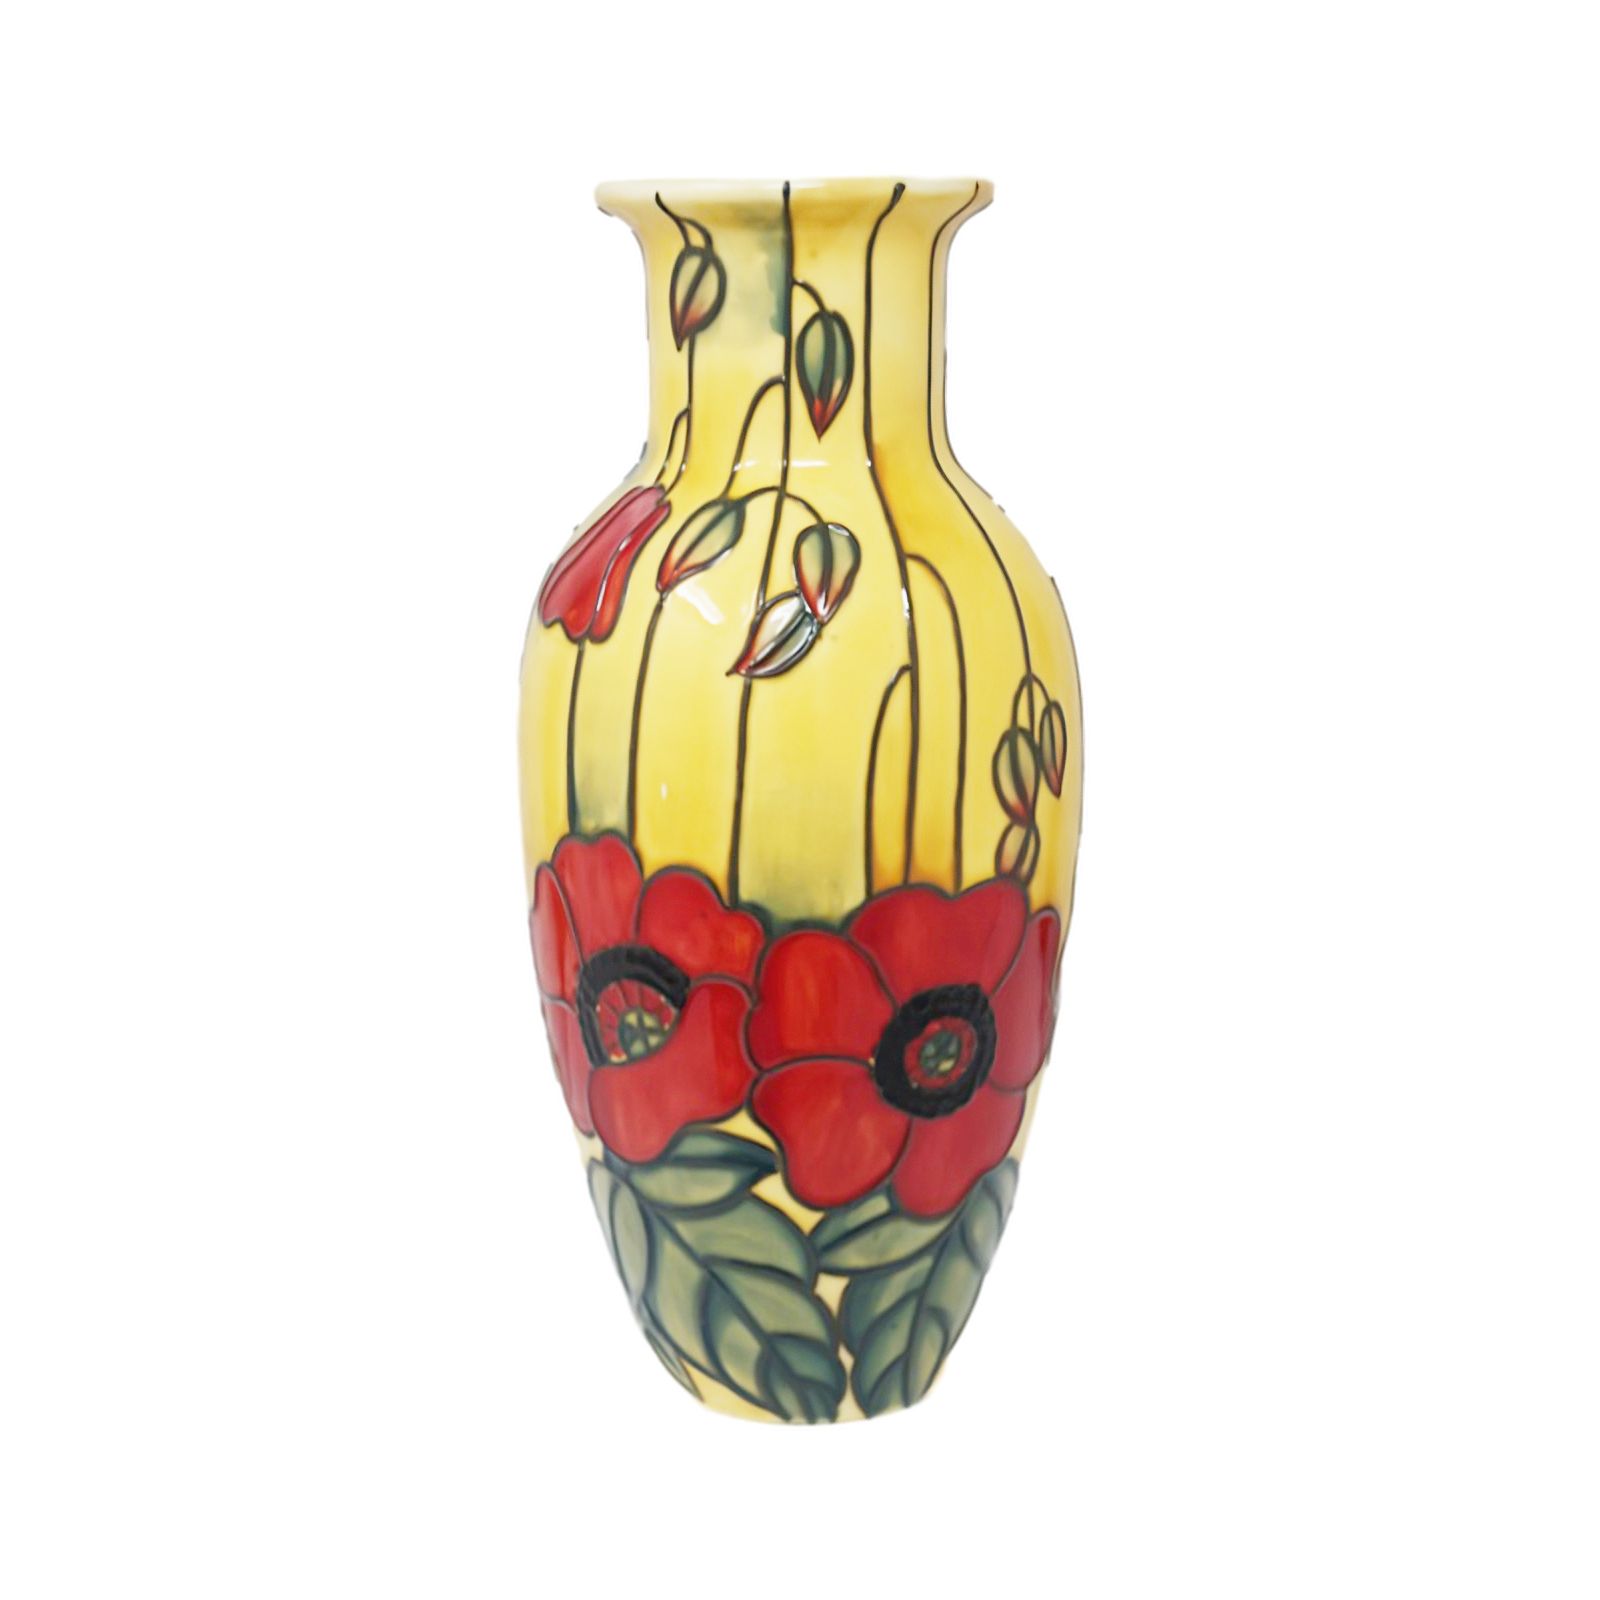 remembrance day gift floral vase with red poppies elegant vase